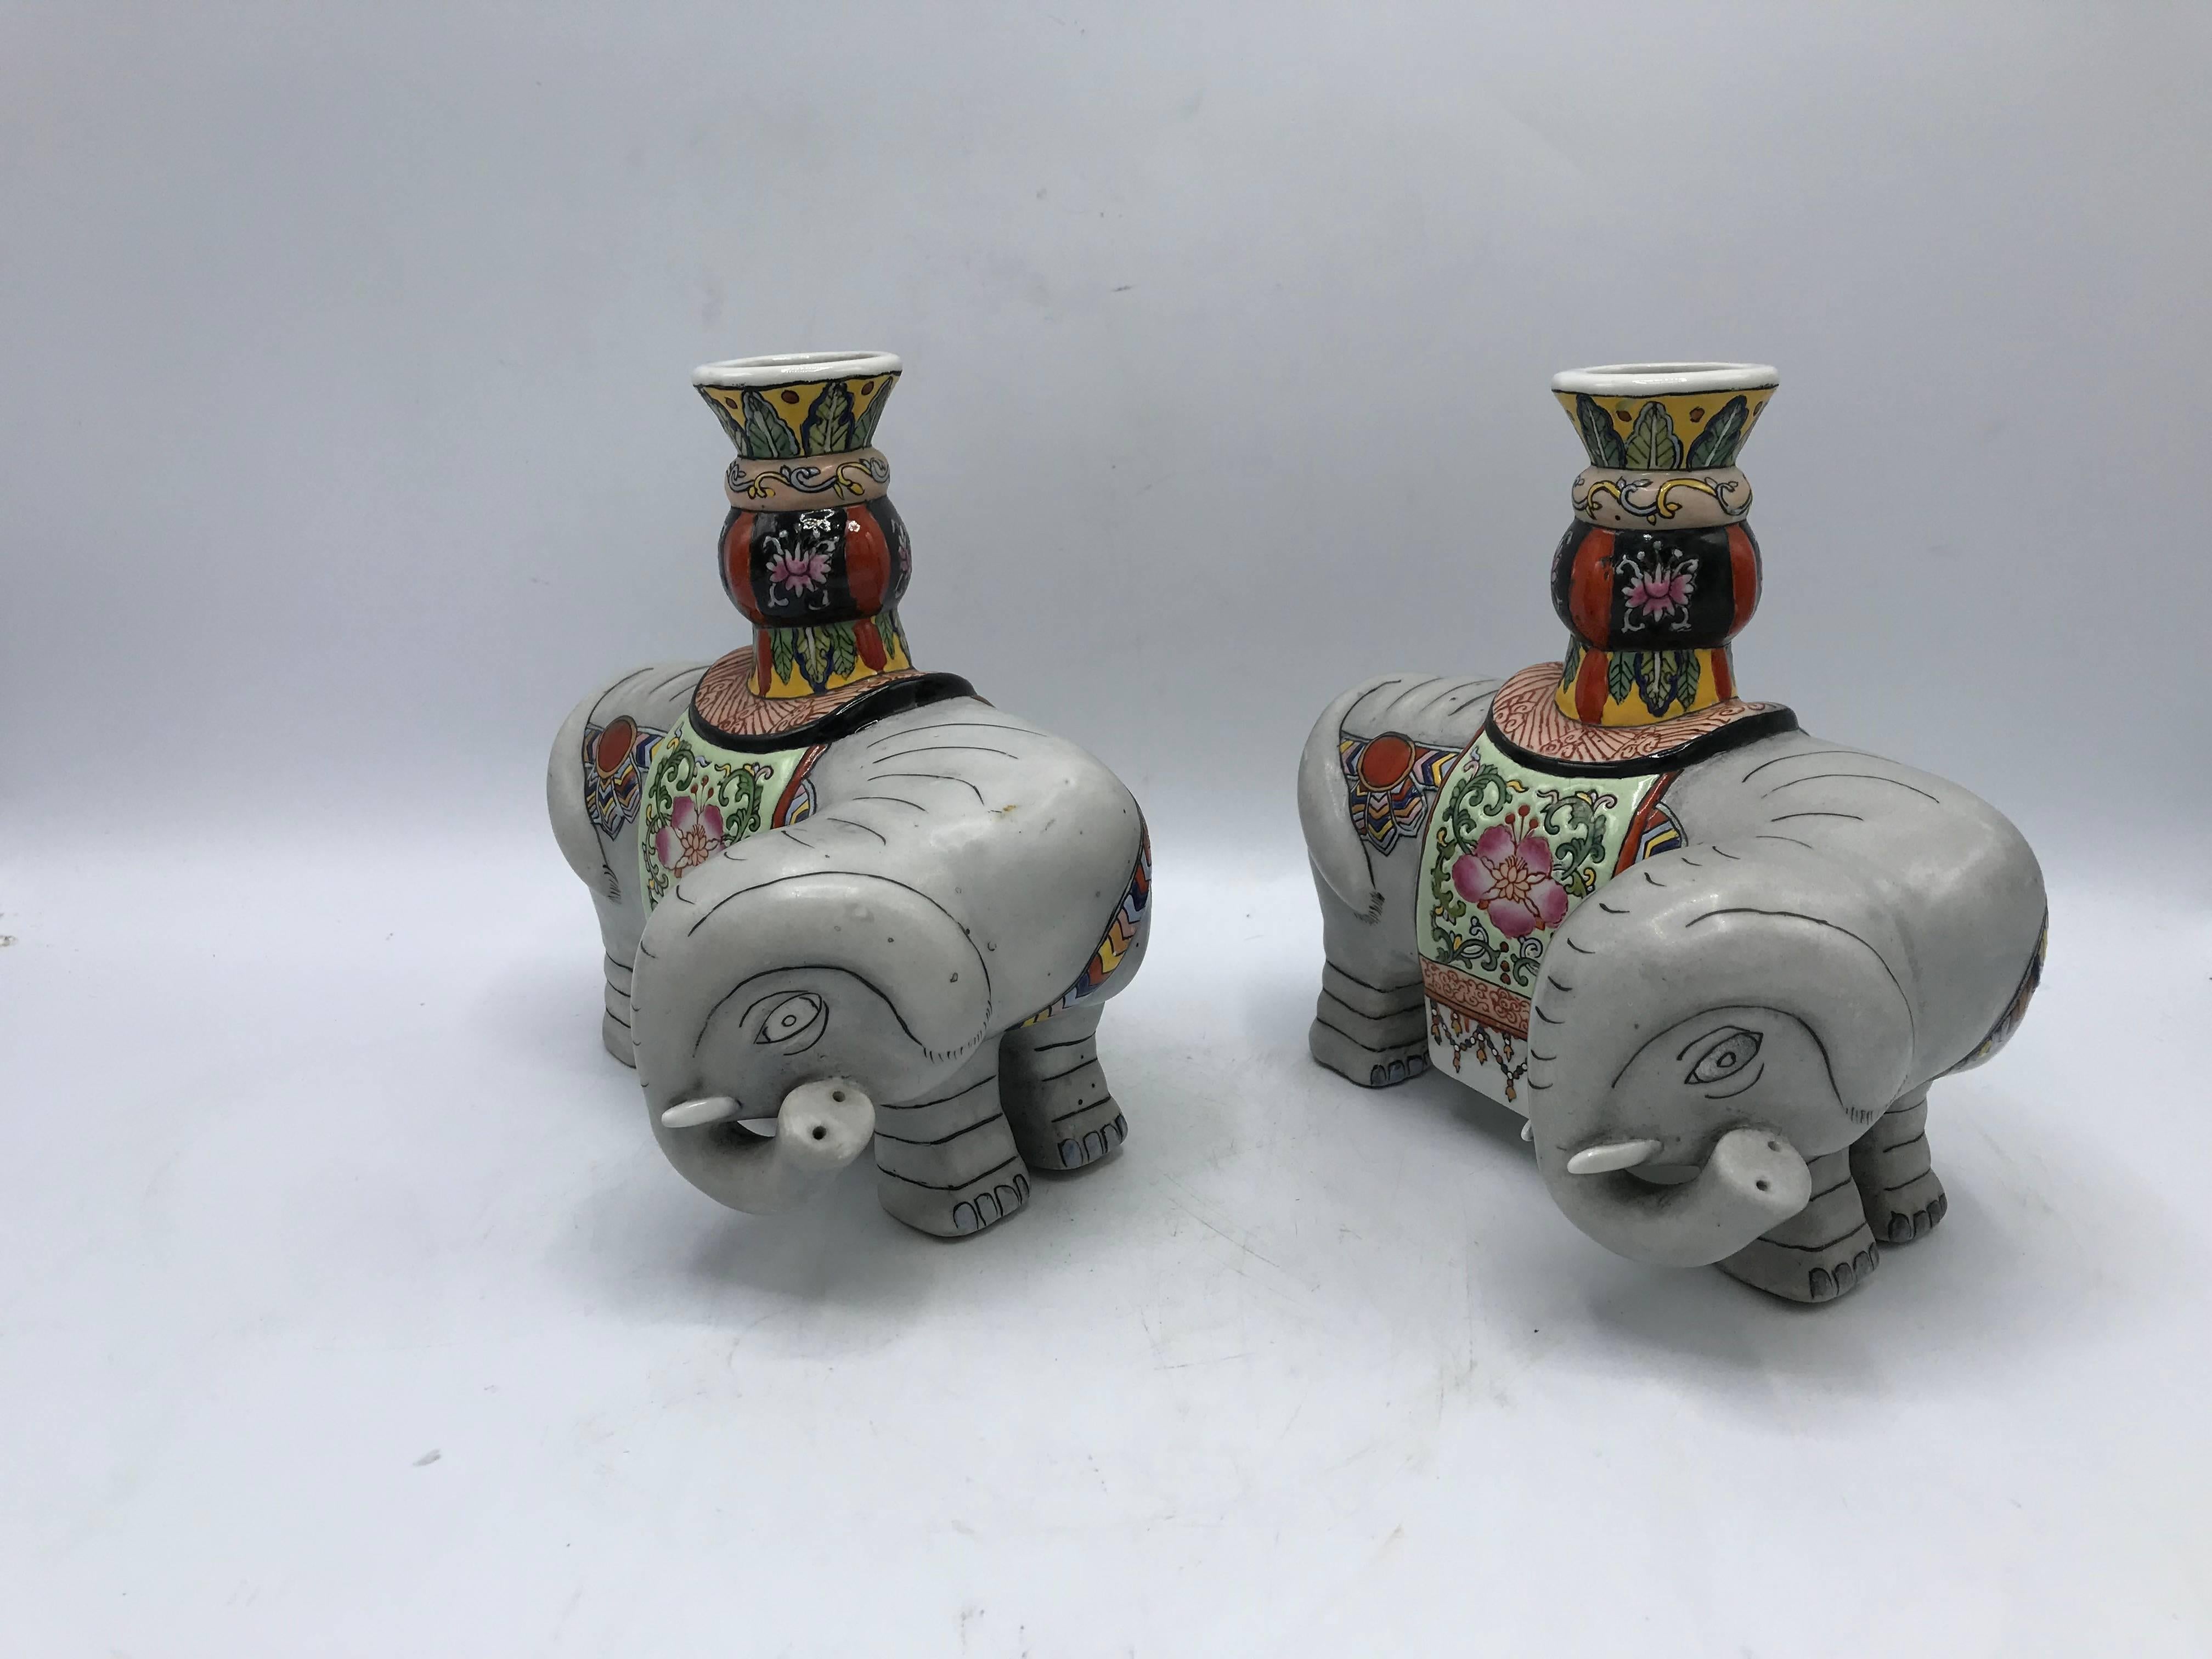 Offered is a gorgeous and fun, pair of 1960s polychrome ceramic elephant sculpture candlestick holders. Heavy,